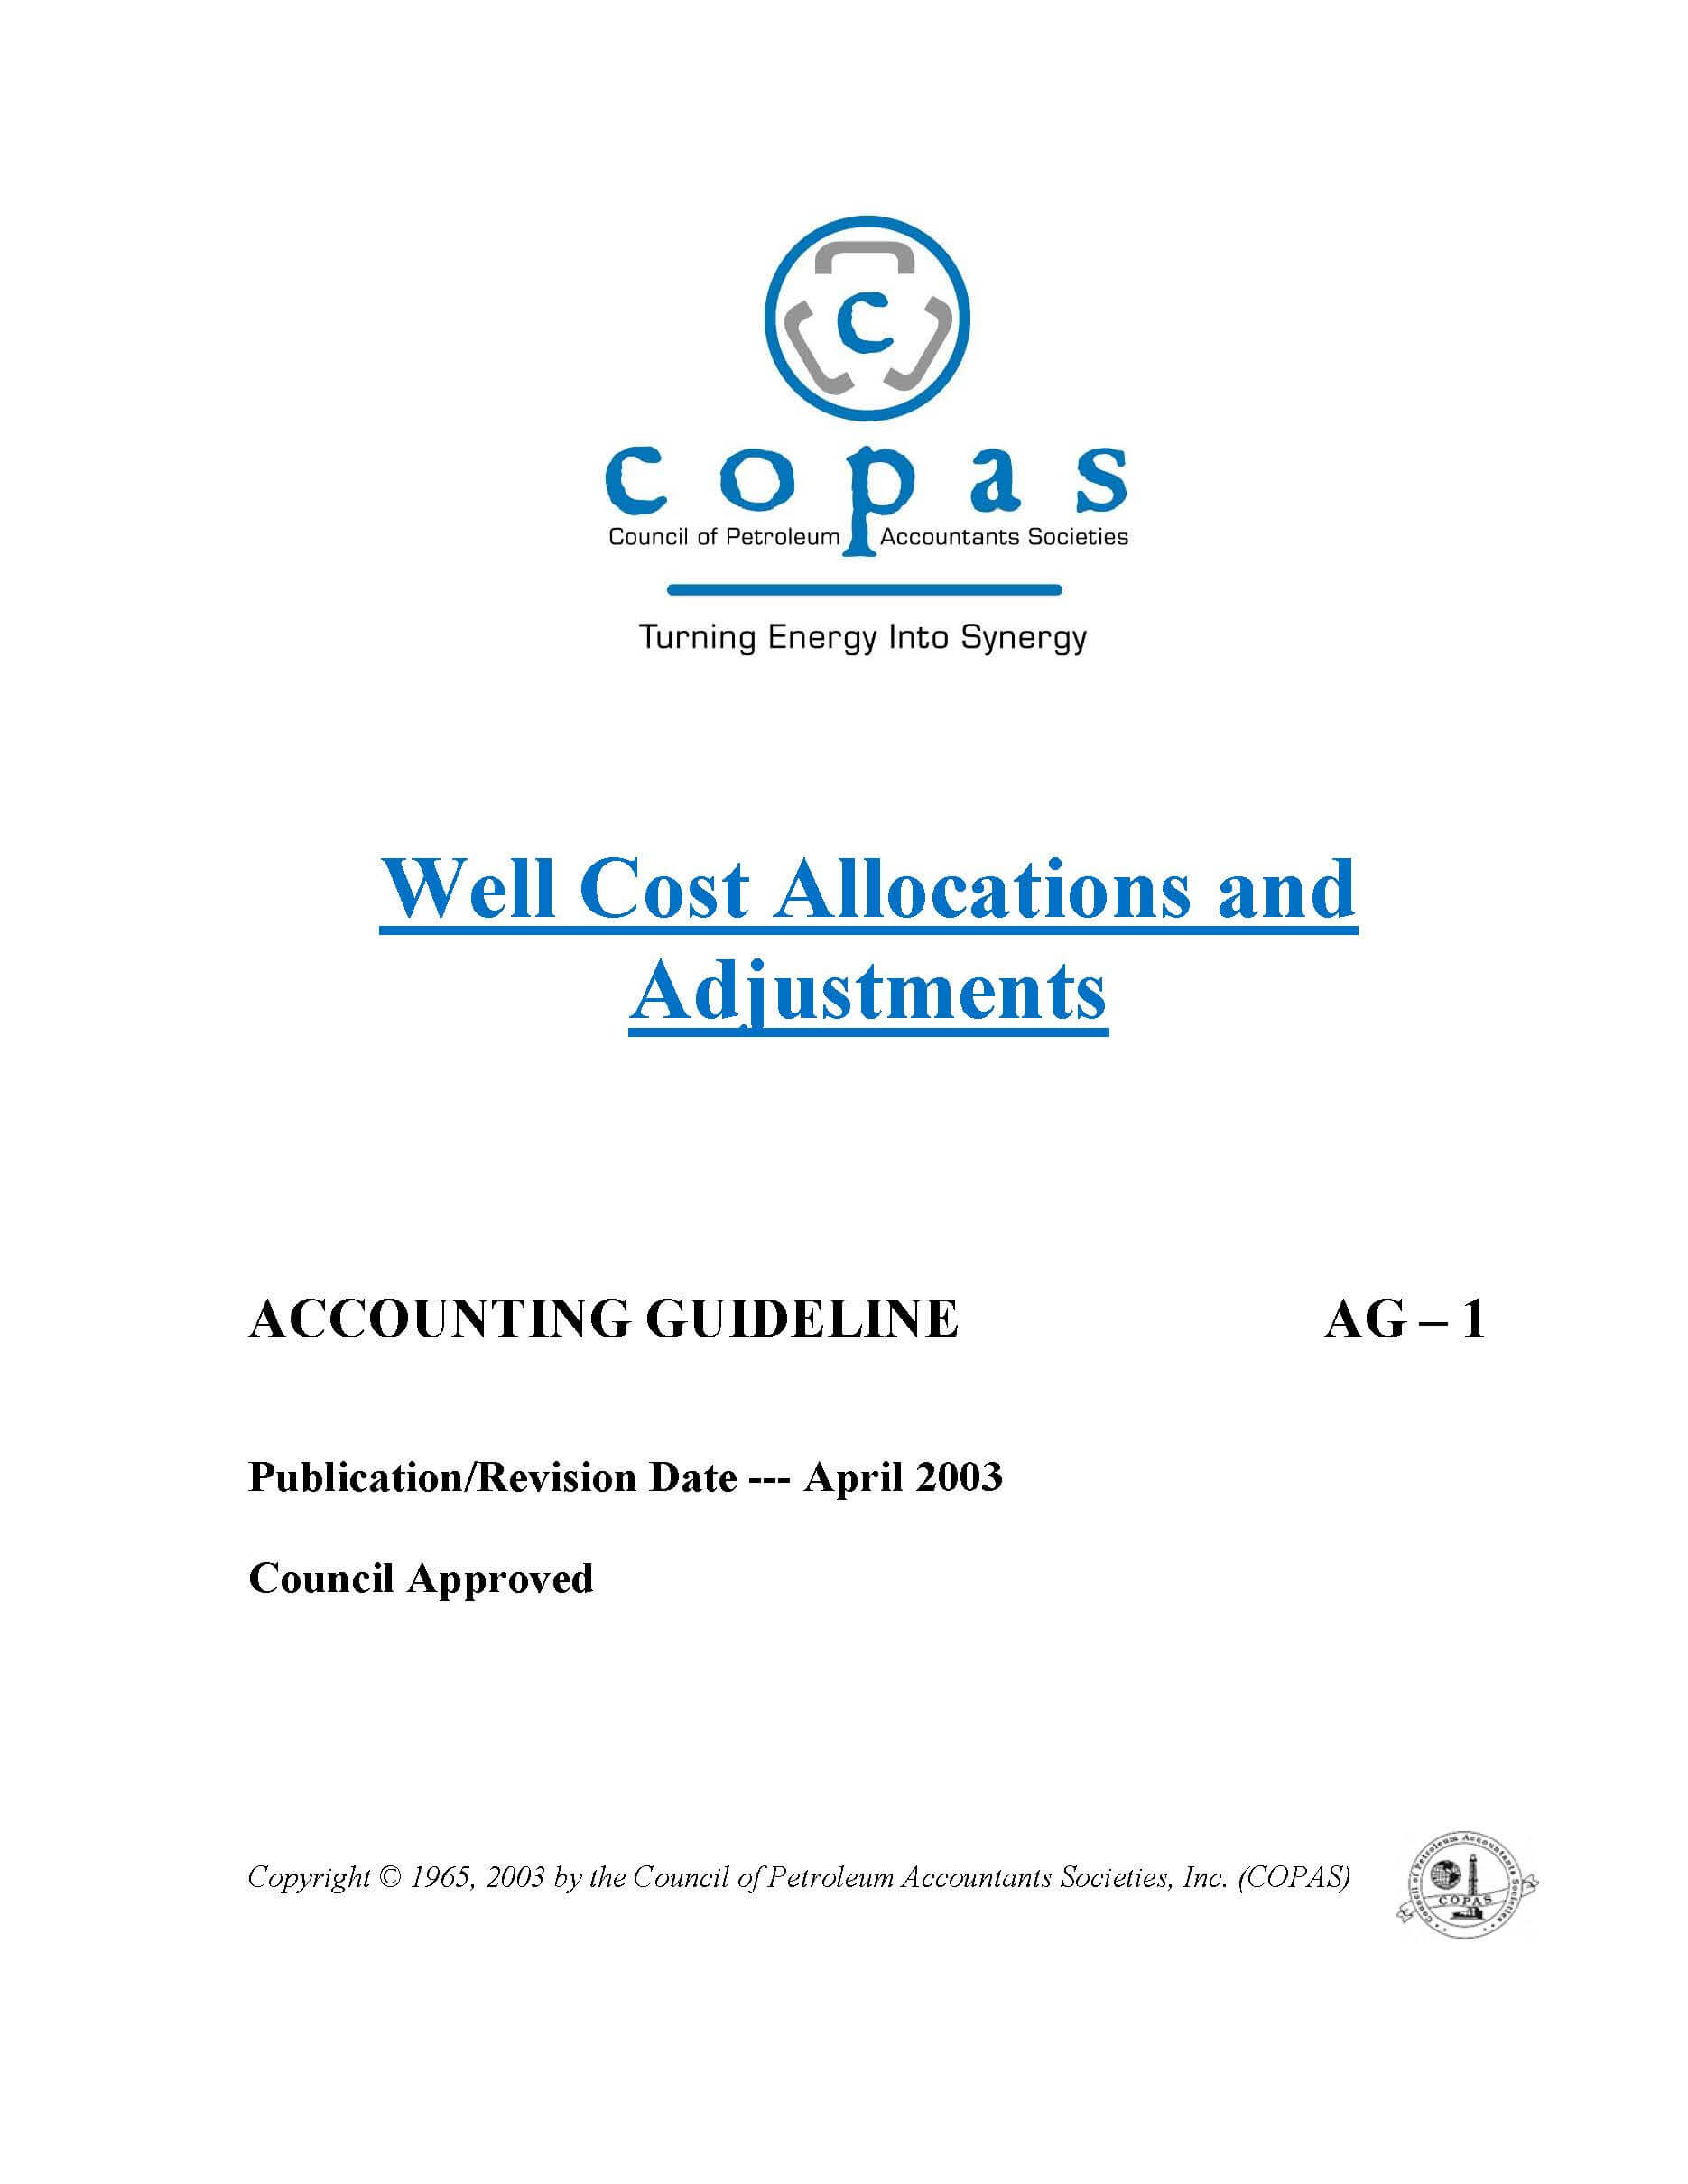 AG-1 Well Cost Allocations and Adjustments - products AG 1 Wells Costs Allocations and Adjustments - Council of Petroleum Accountants Societies